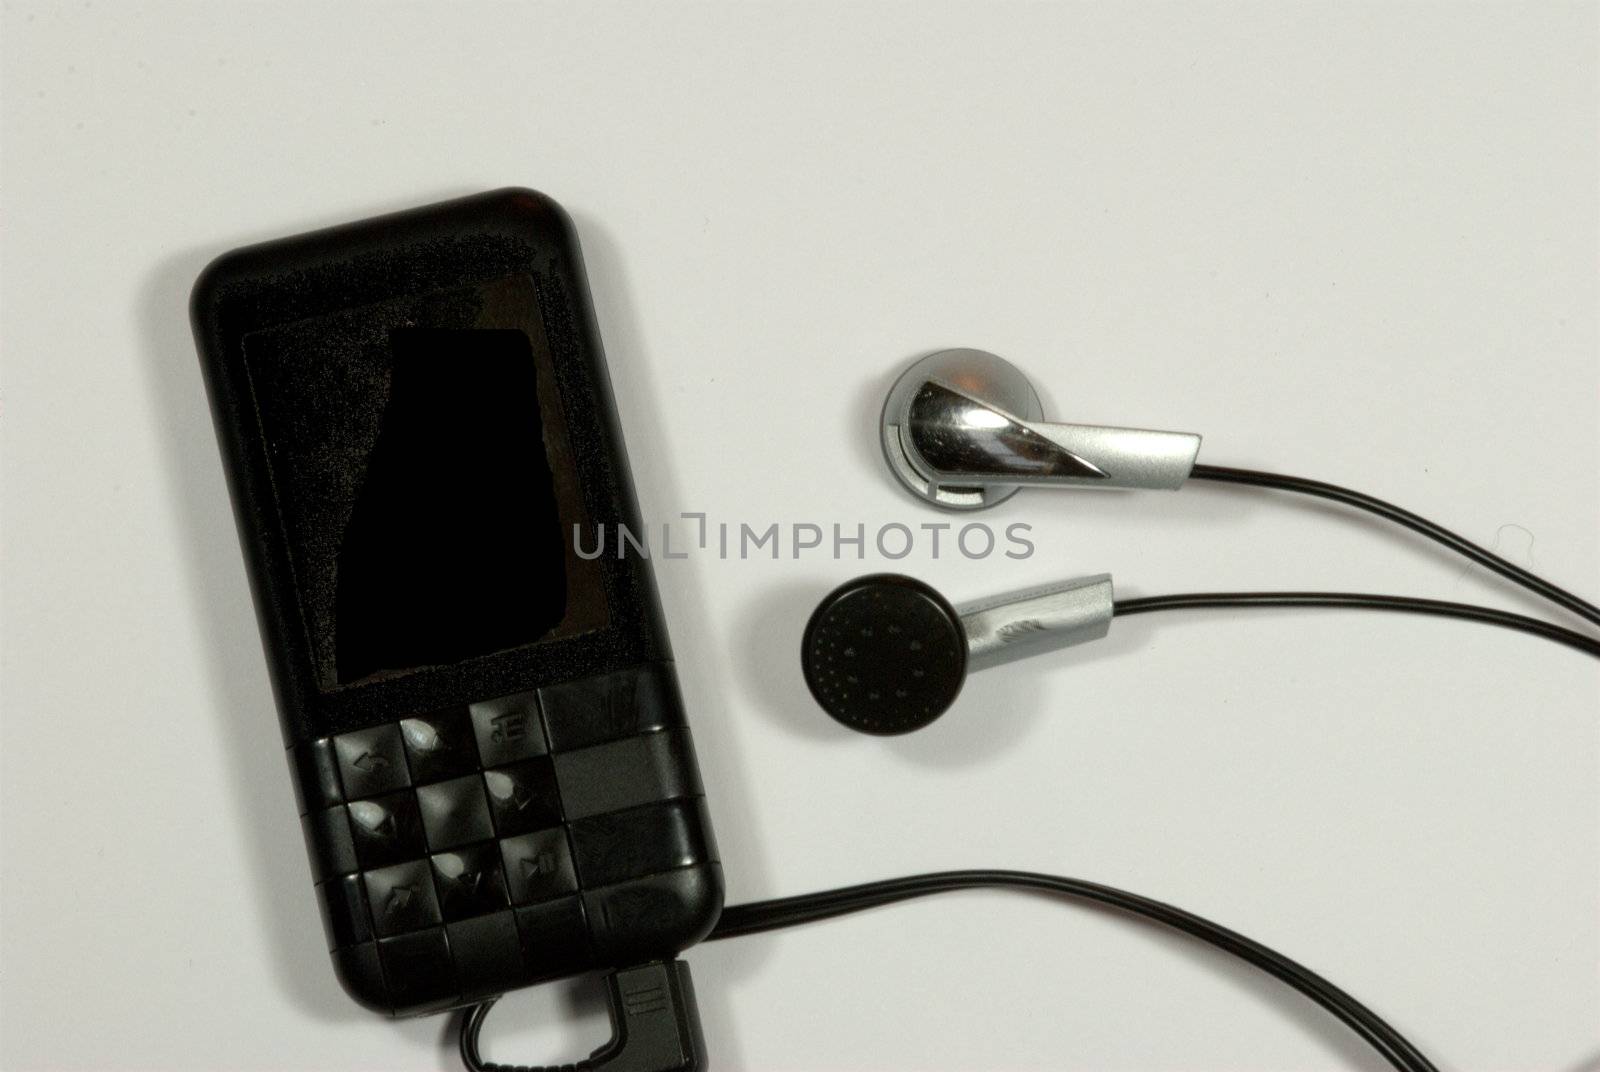 MP3 Player and headphones